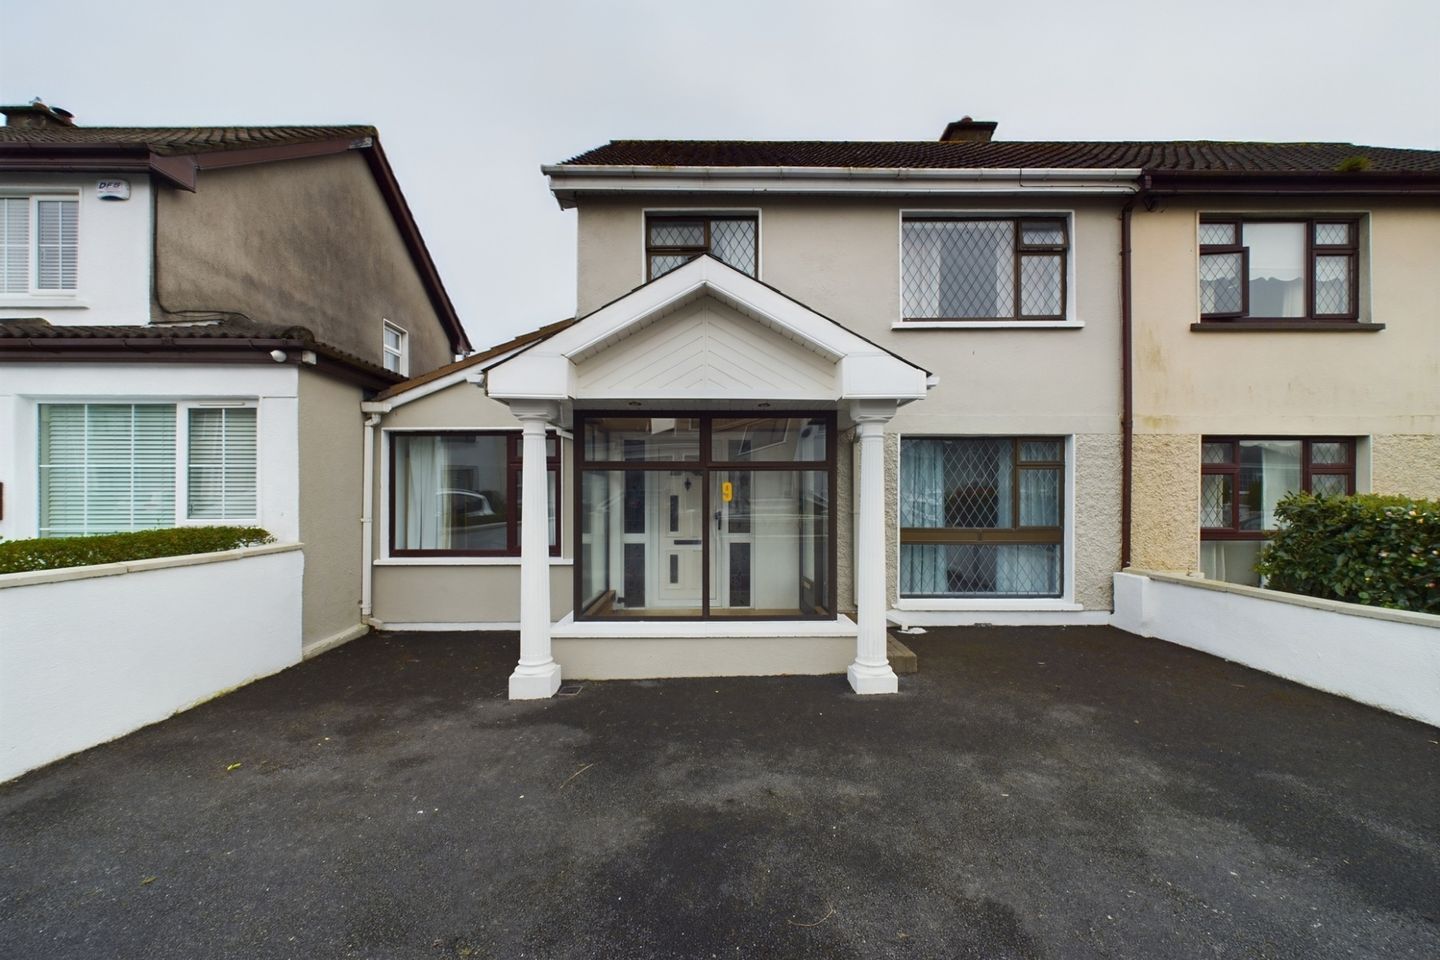 9 Thomond Green, Lismore Lawn, Waterford, Waterford City, Co. Waterford, X91FY6E